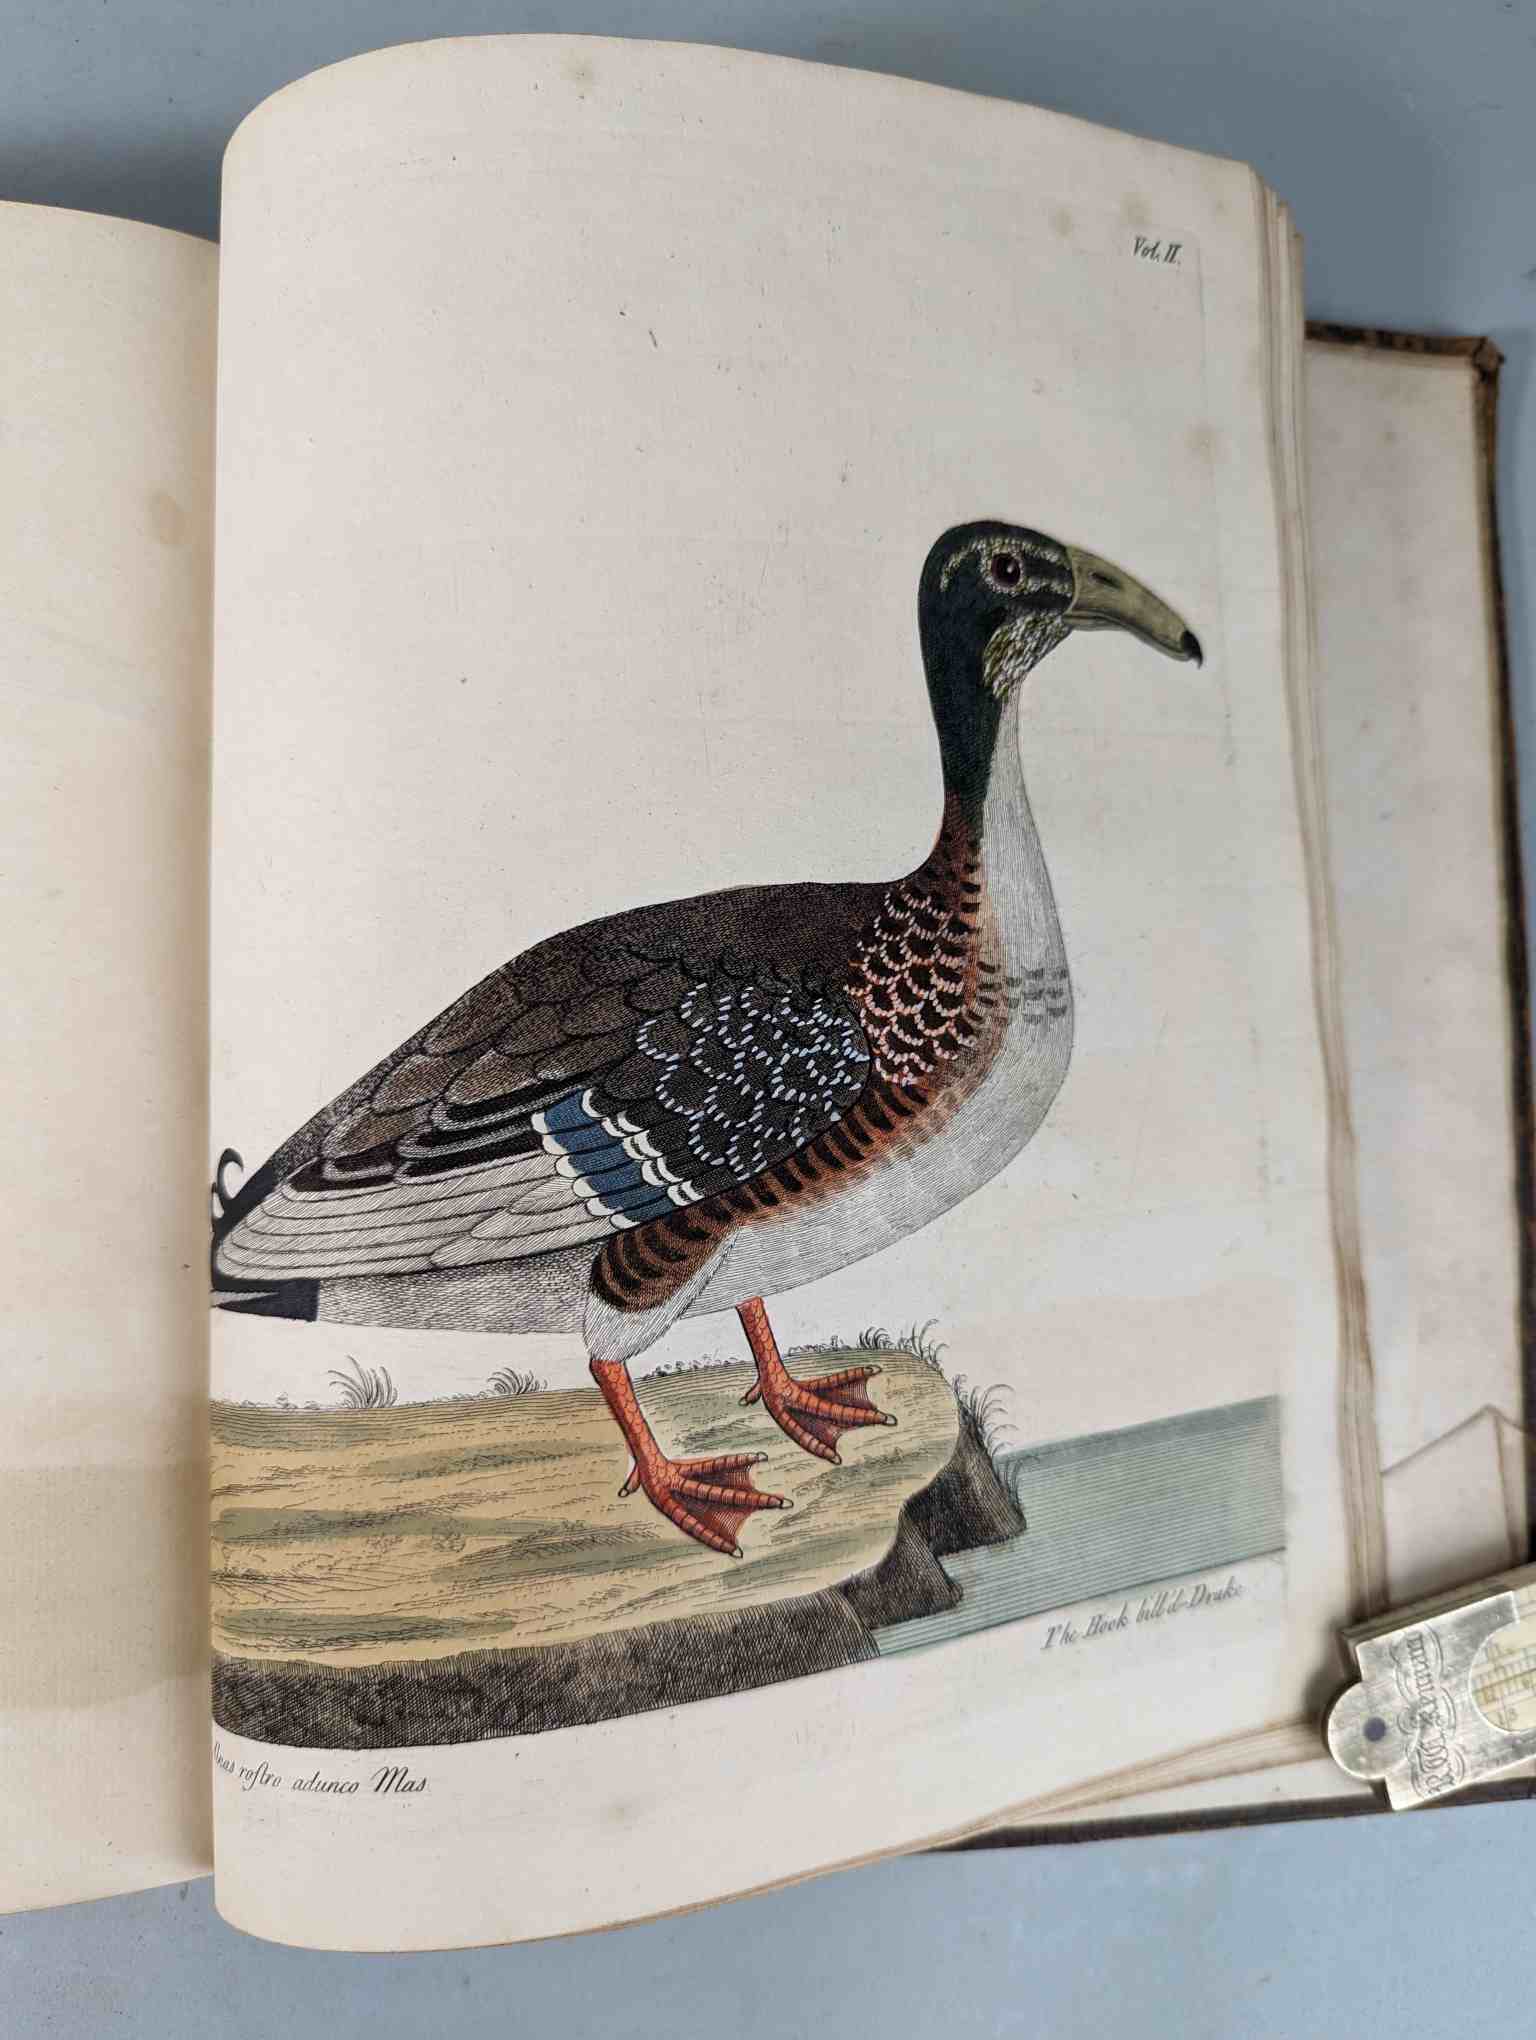 ALBIN, Eleazar. A Natural History of Birds, to which are added, Notes and Observations by W. - Image 201 of 208